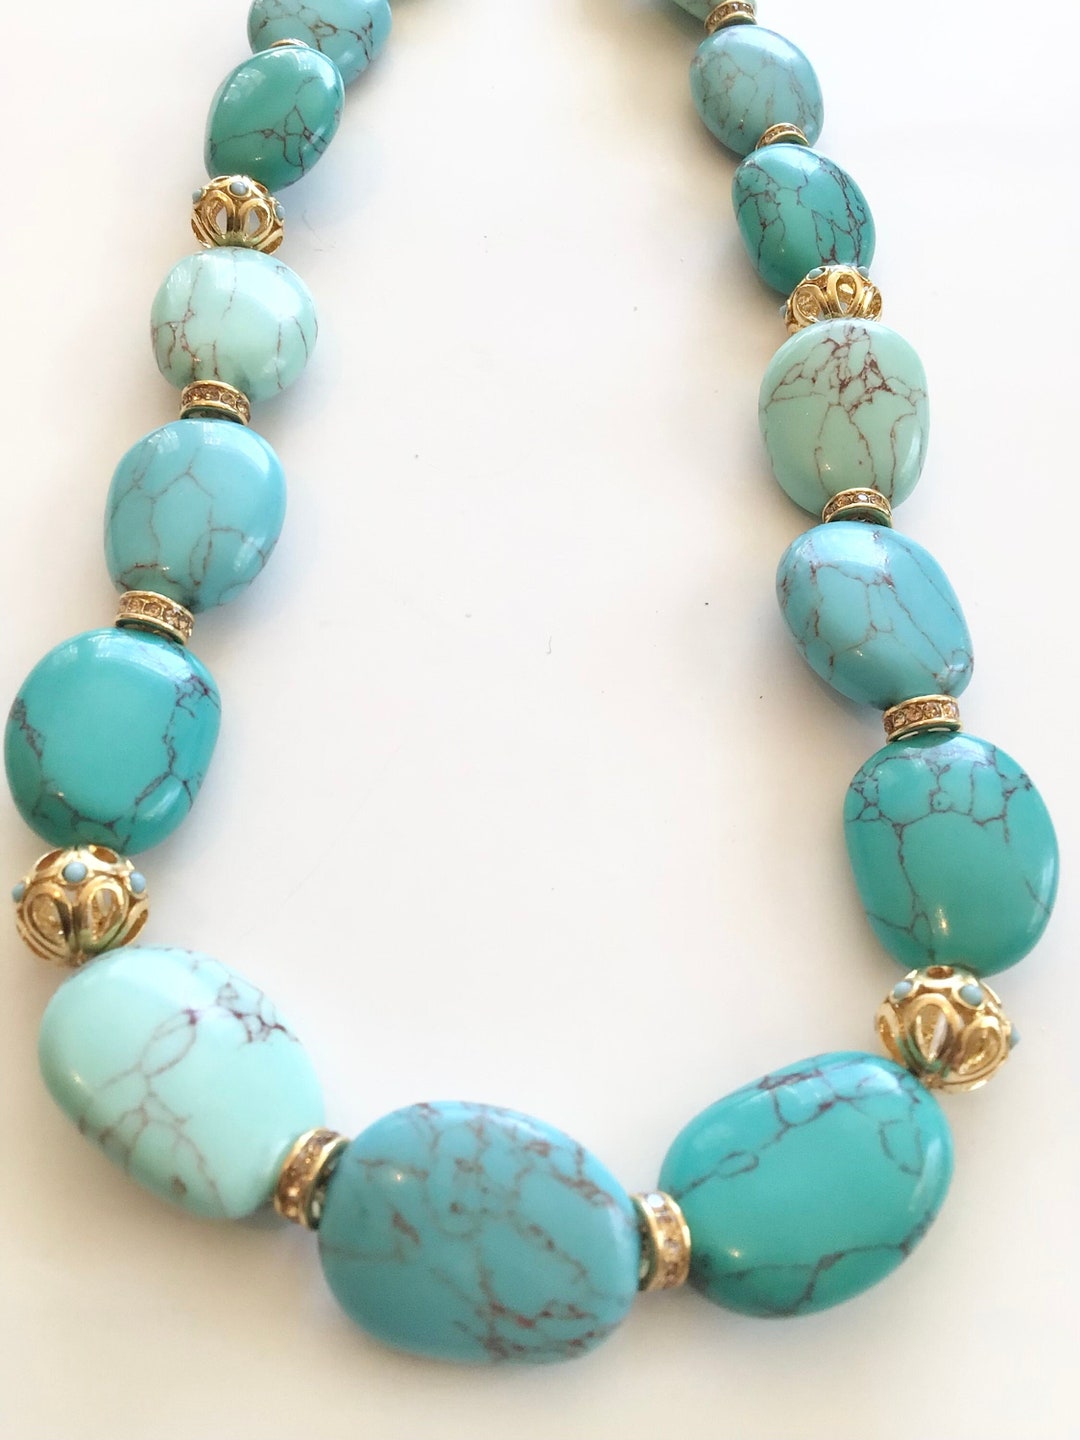 Chunky Statement Turquoise Necklace, Big Turquoise Necklace, Blue Turquoise,  Genuine Turquoise Necklace, Gift for Her - Etsy